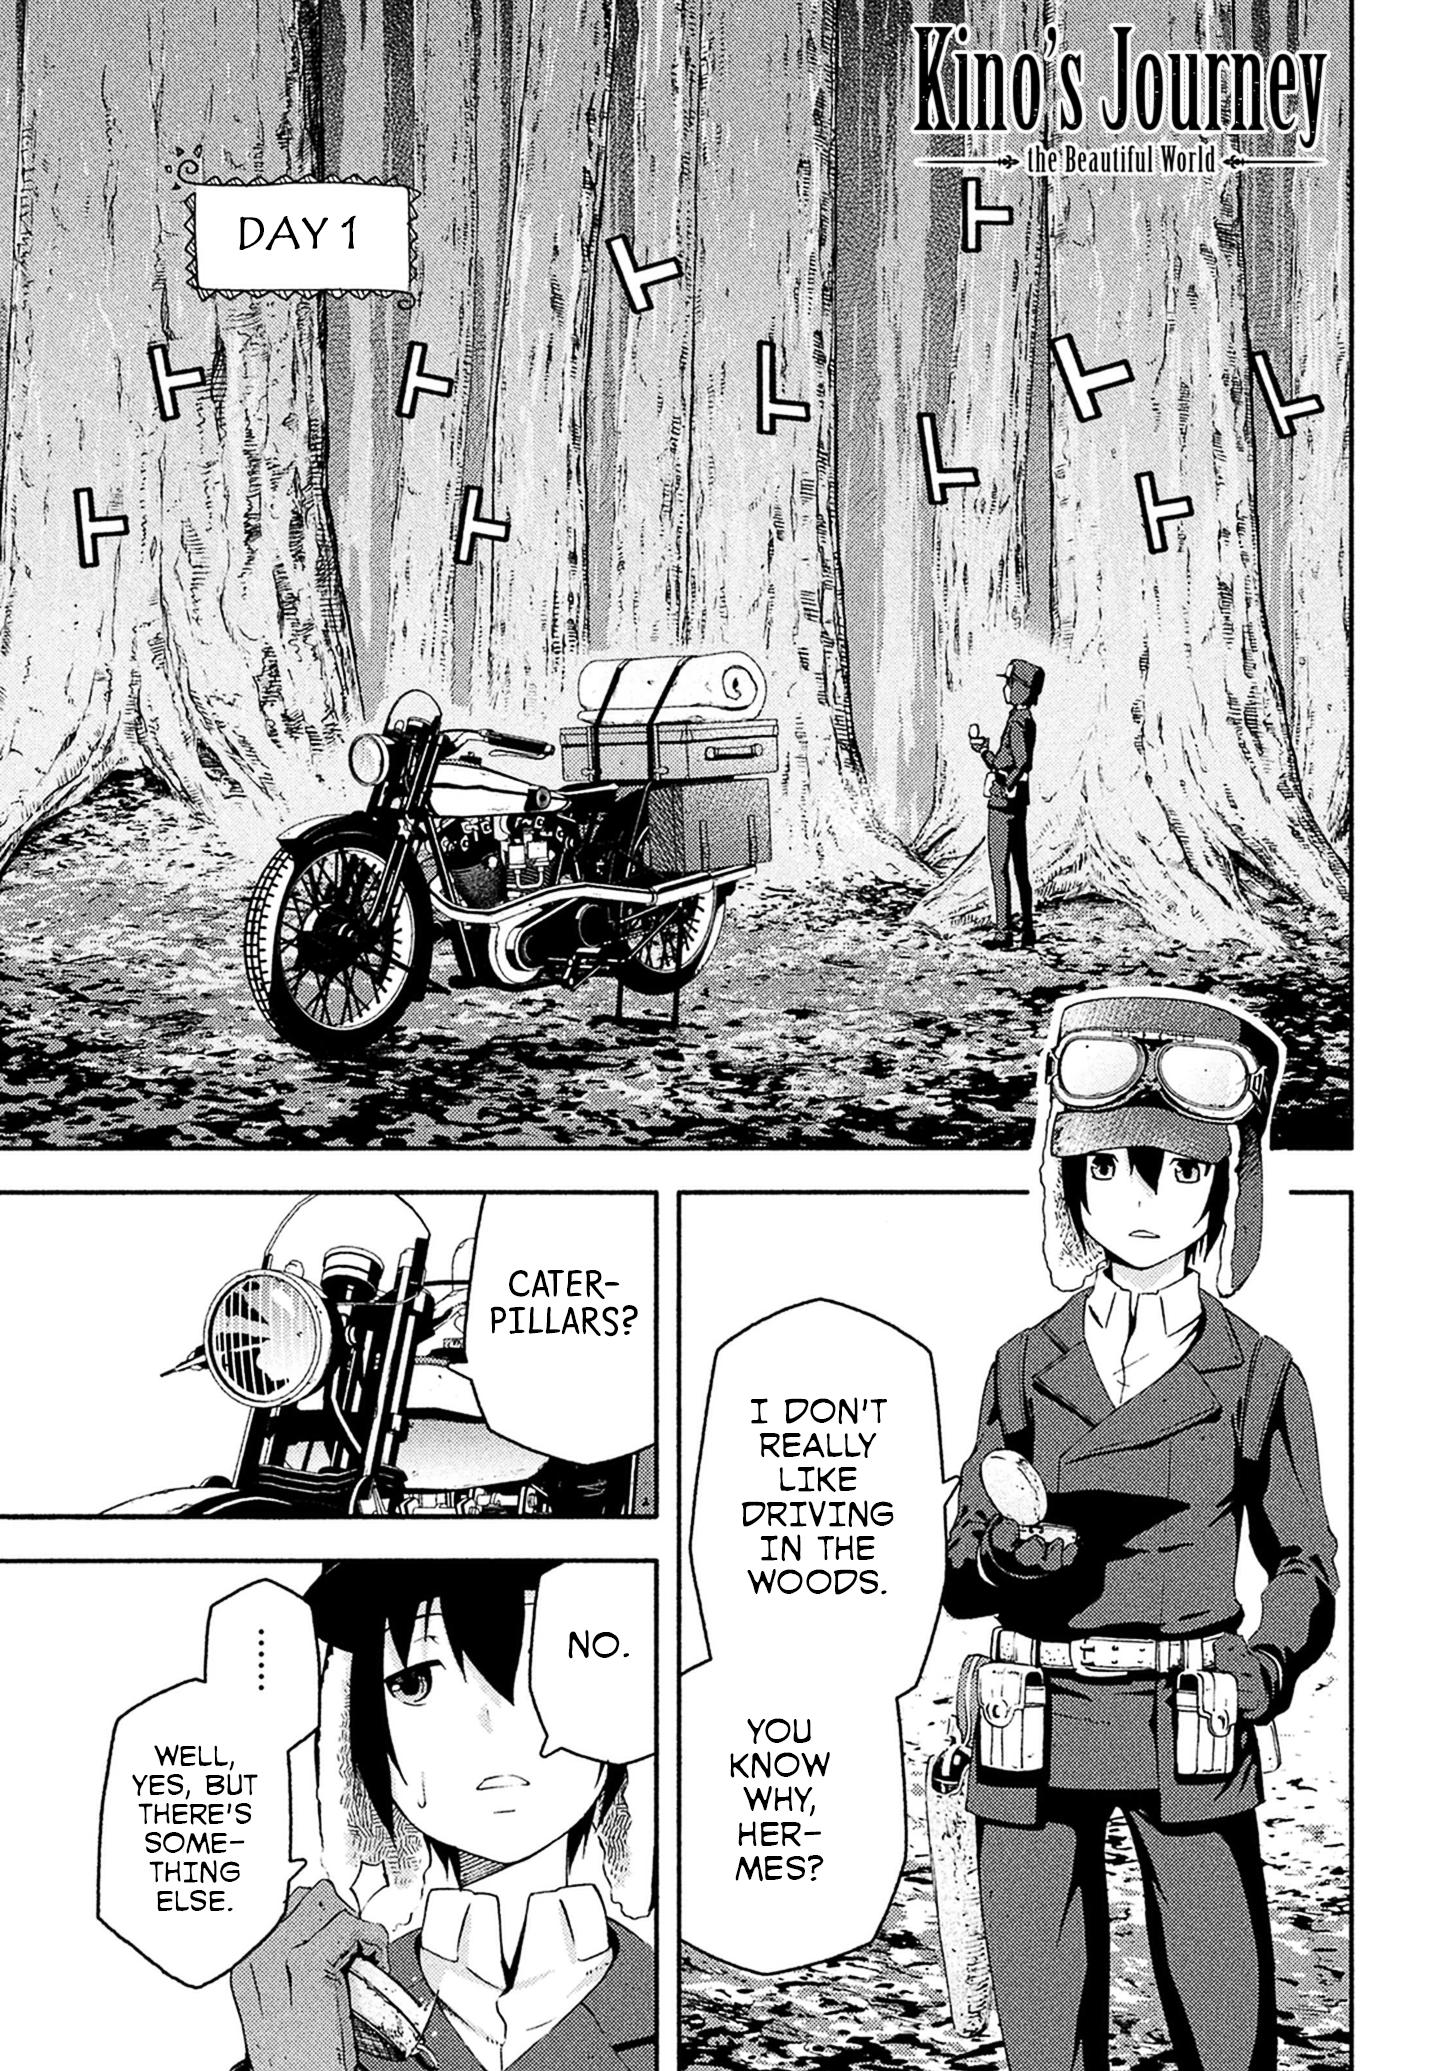 Kino's Journey - Page 1